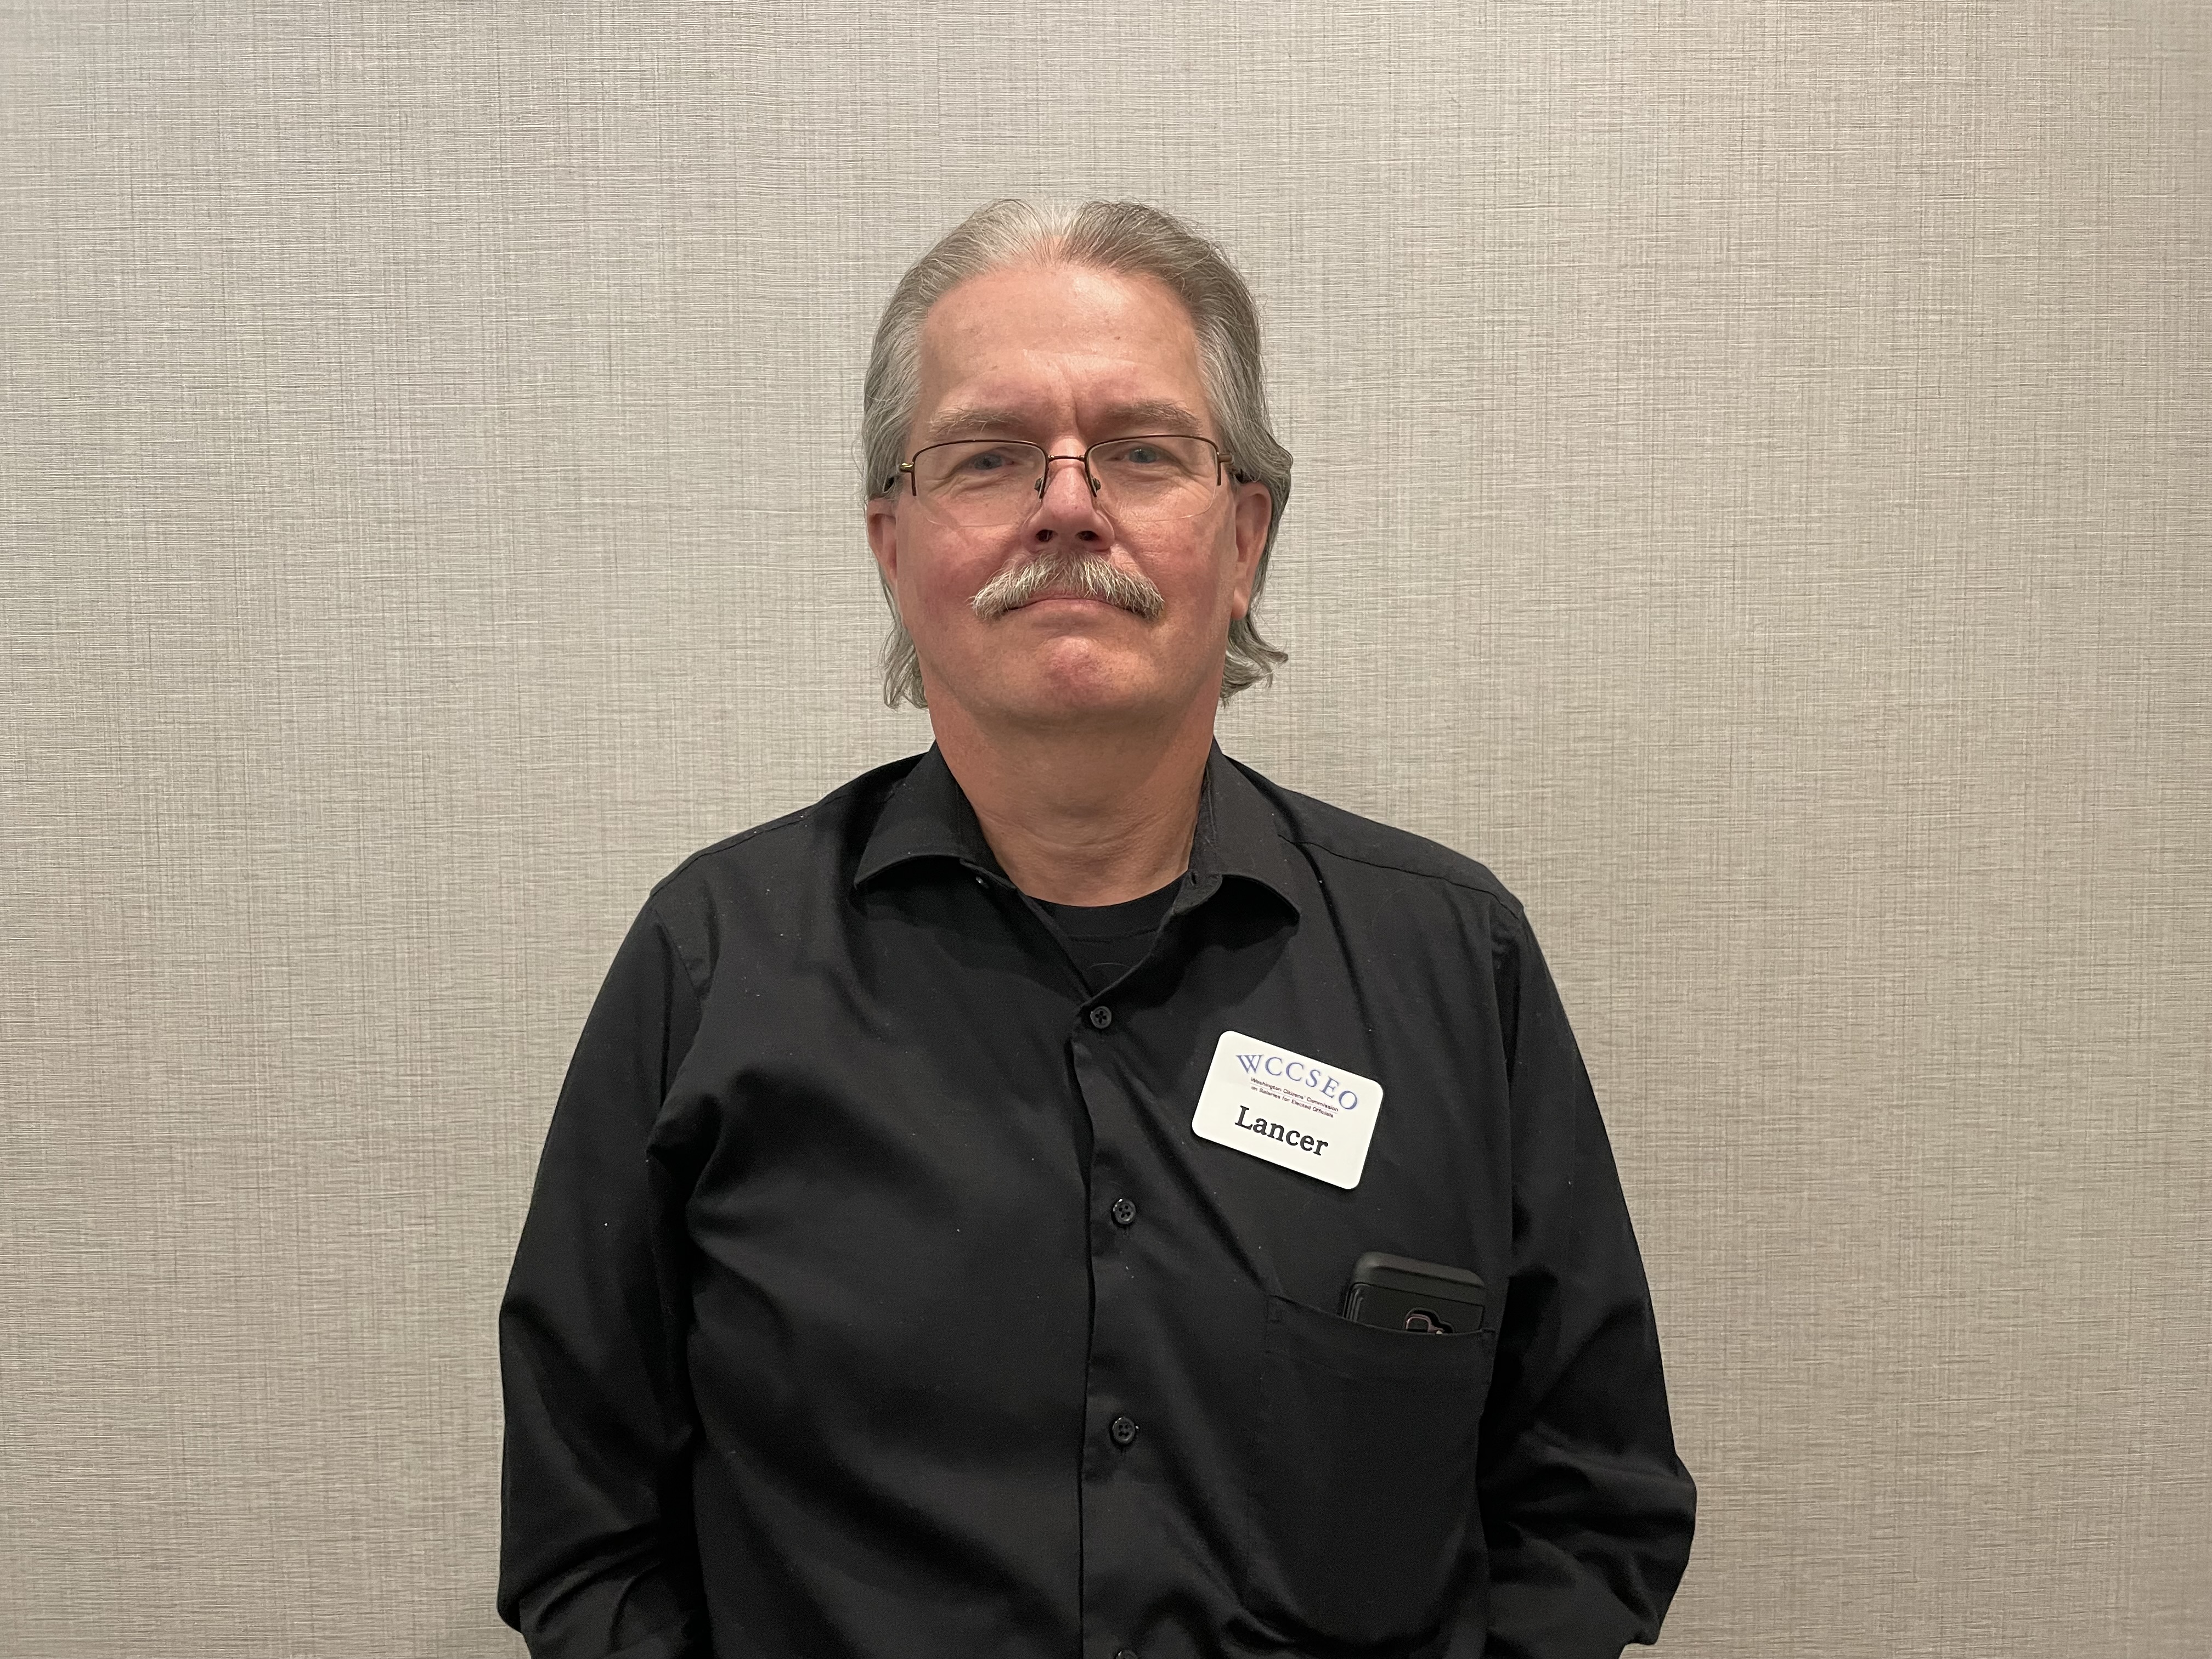 Lancer, white man with a slight smile, glasses, and a moustache, wearing a black shirt